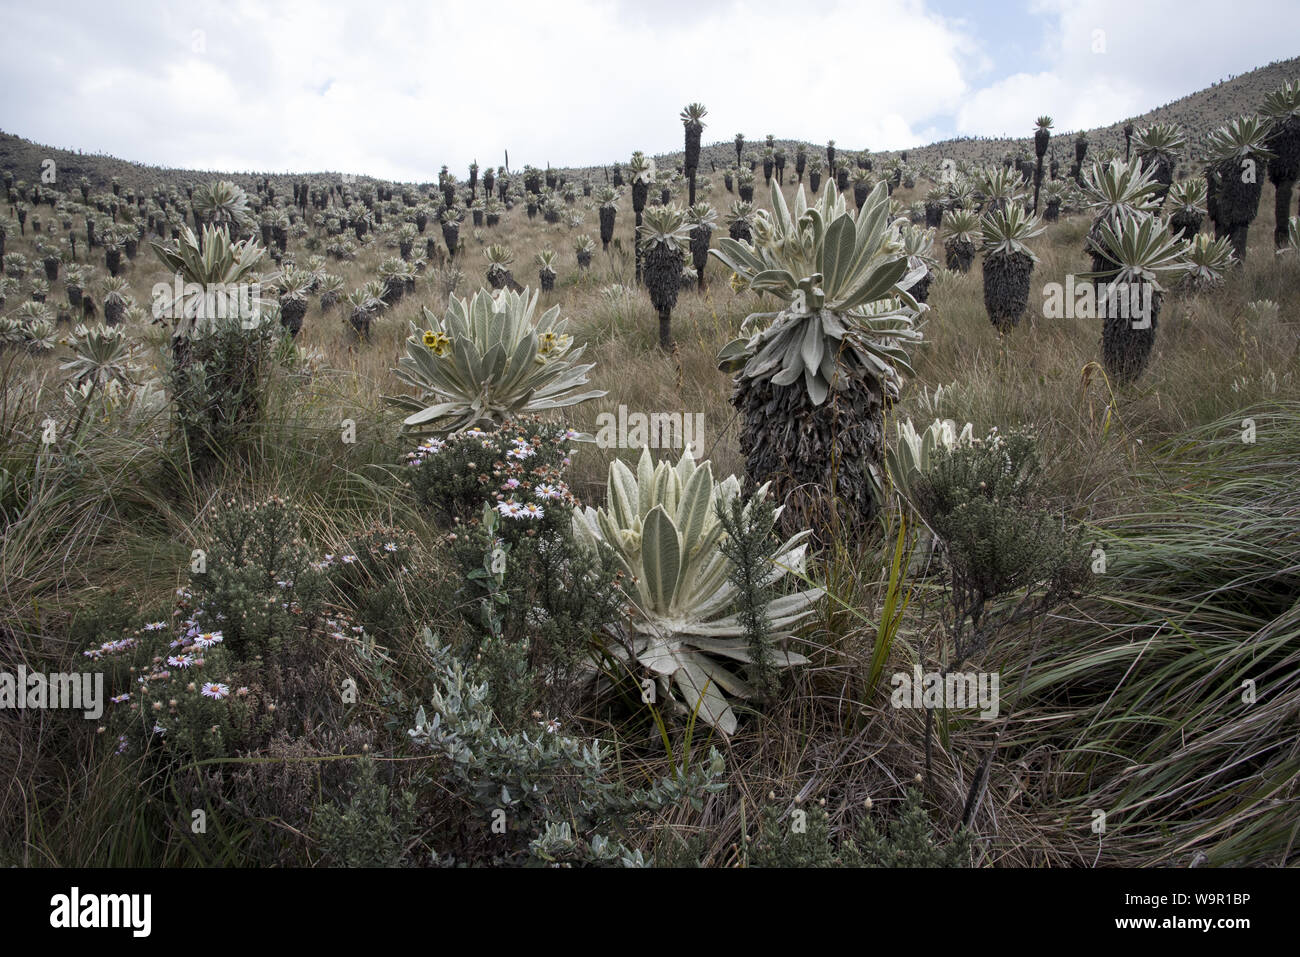 Frailejones or Espeletia growing on the Páramo highland in the Reserve Ecológica El Ángel at 3800 meters in the Andes of Northern Ecuador. Stock Photo